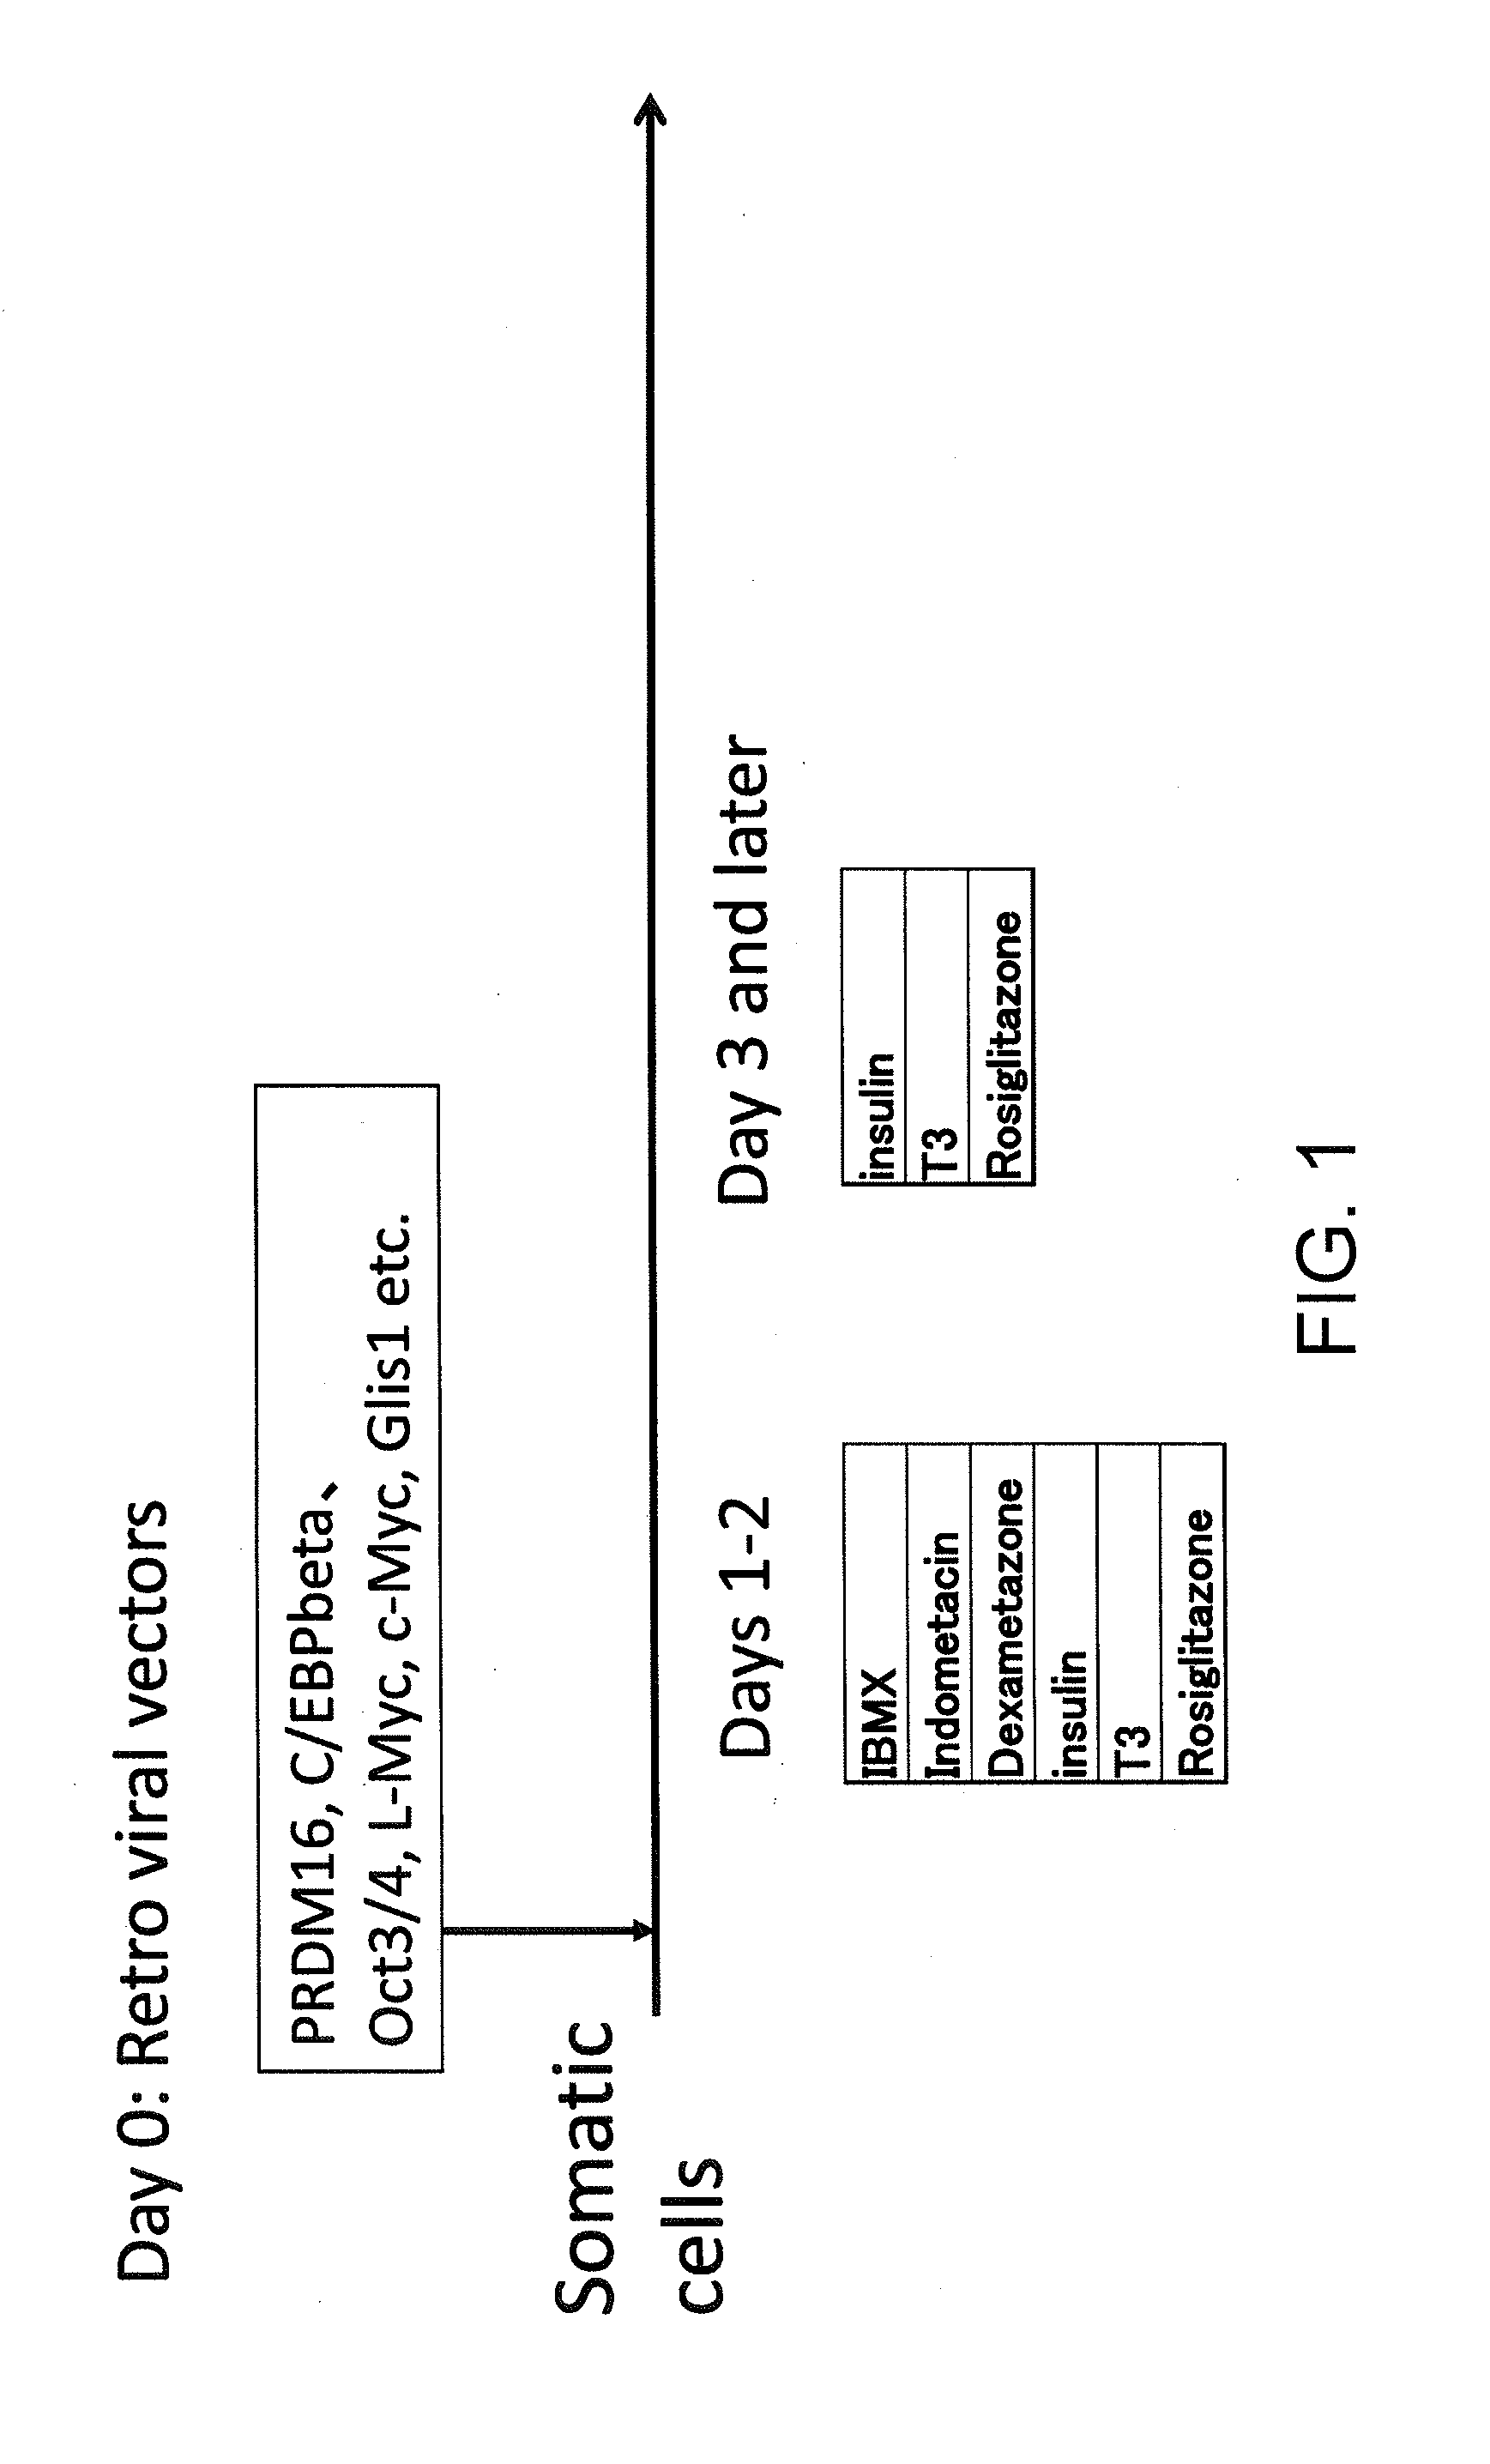 Brown fat cells and method for preparing same